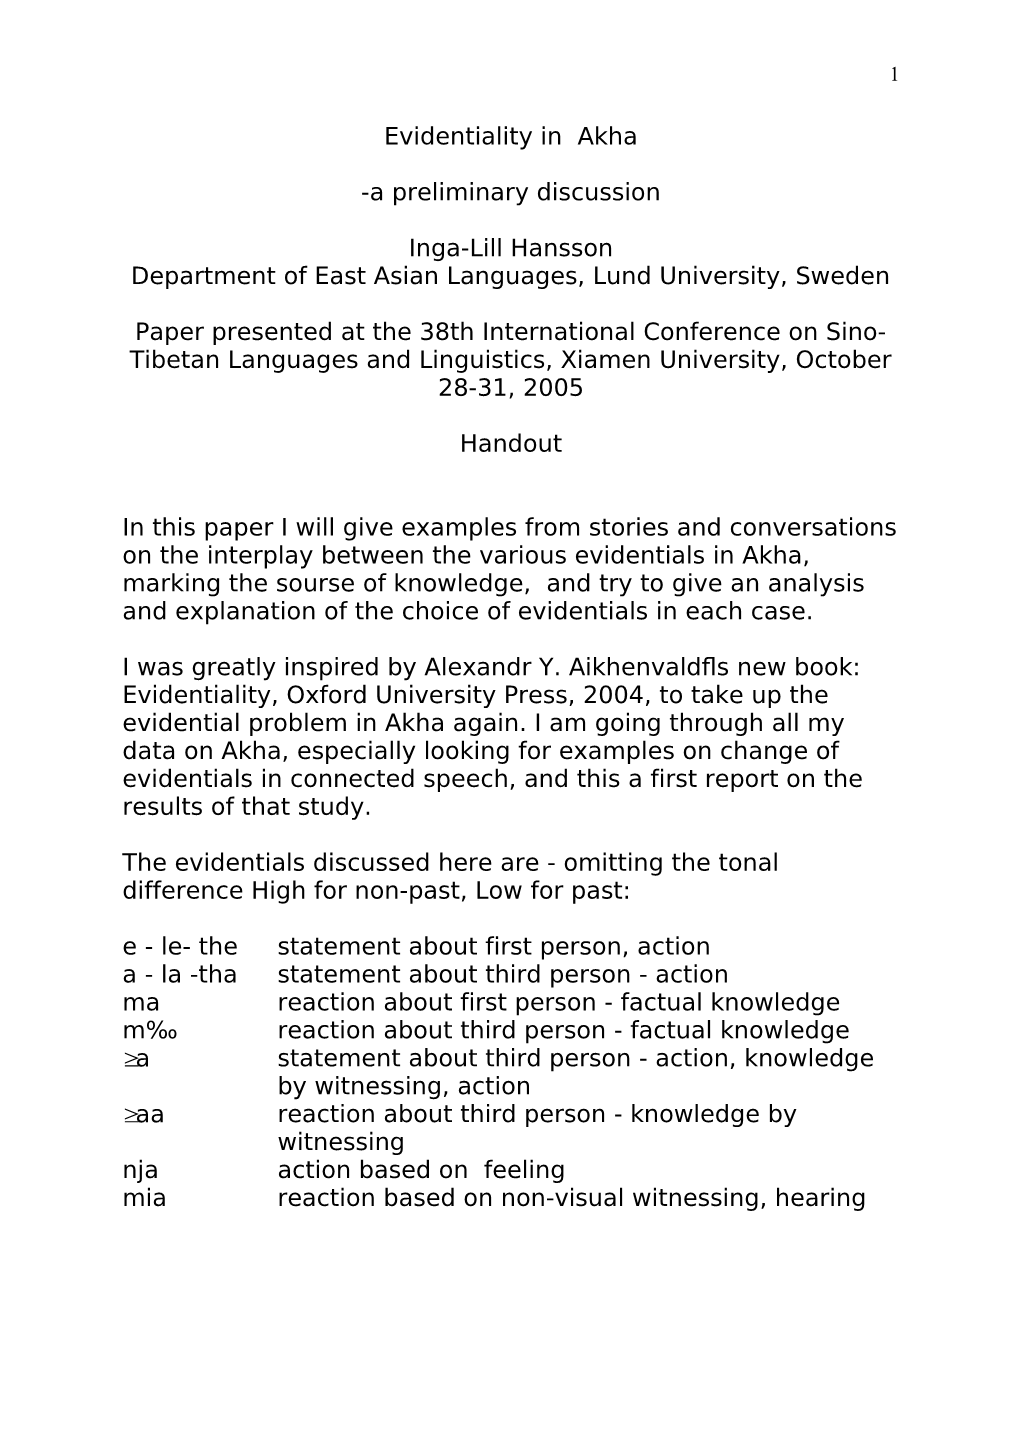 Department of East Asian Languages, Lund University, Sweden